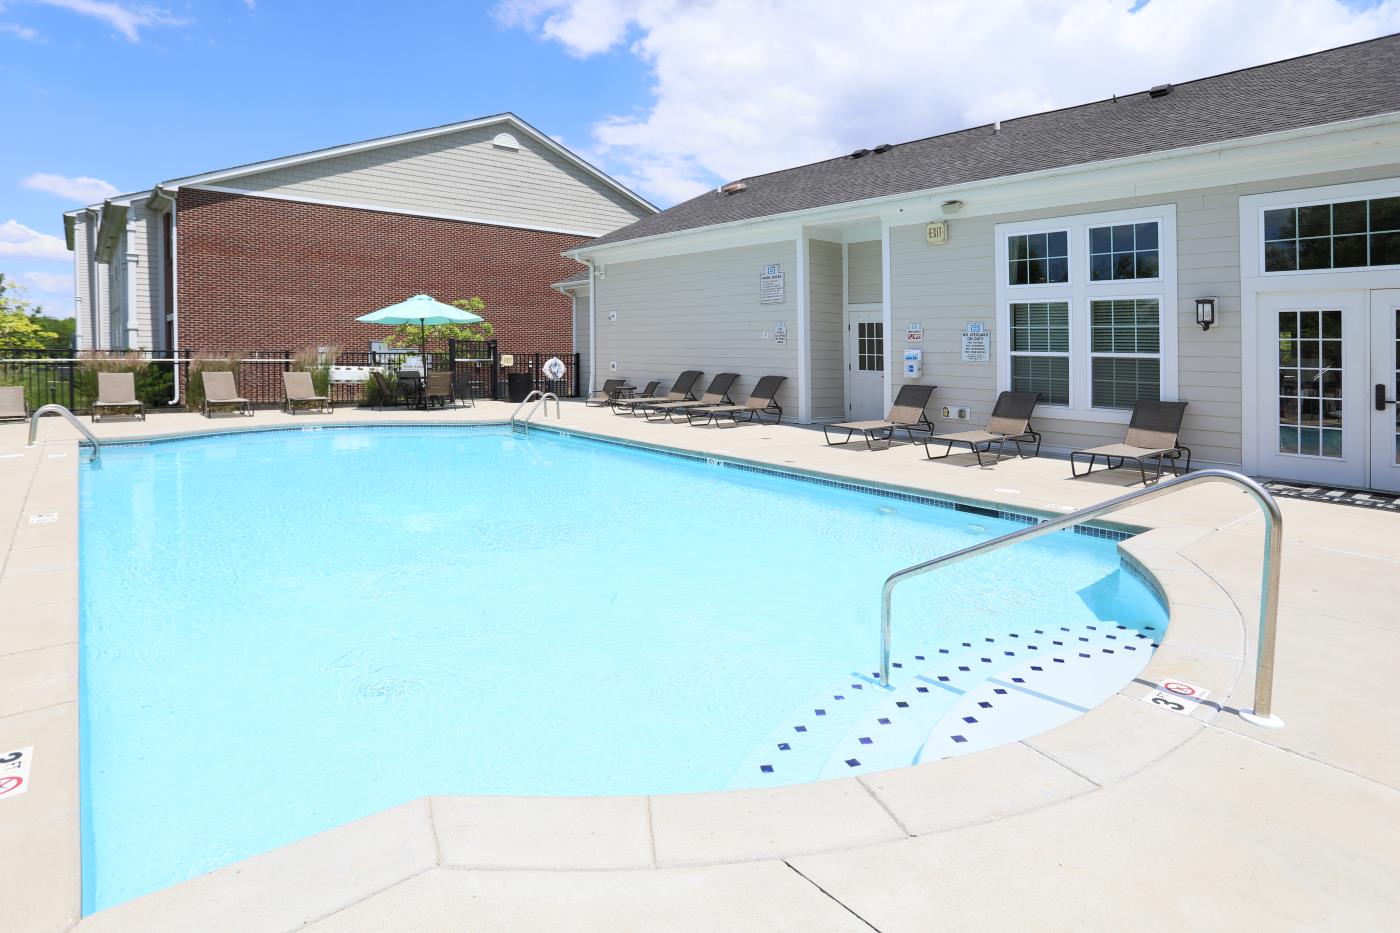 The outdoor pool and pool deck with seating at Brinley Place.